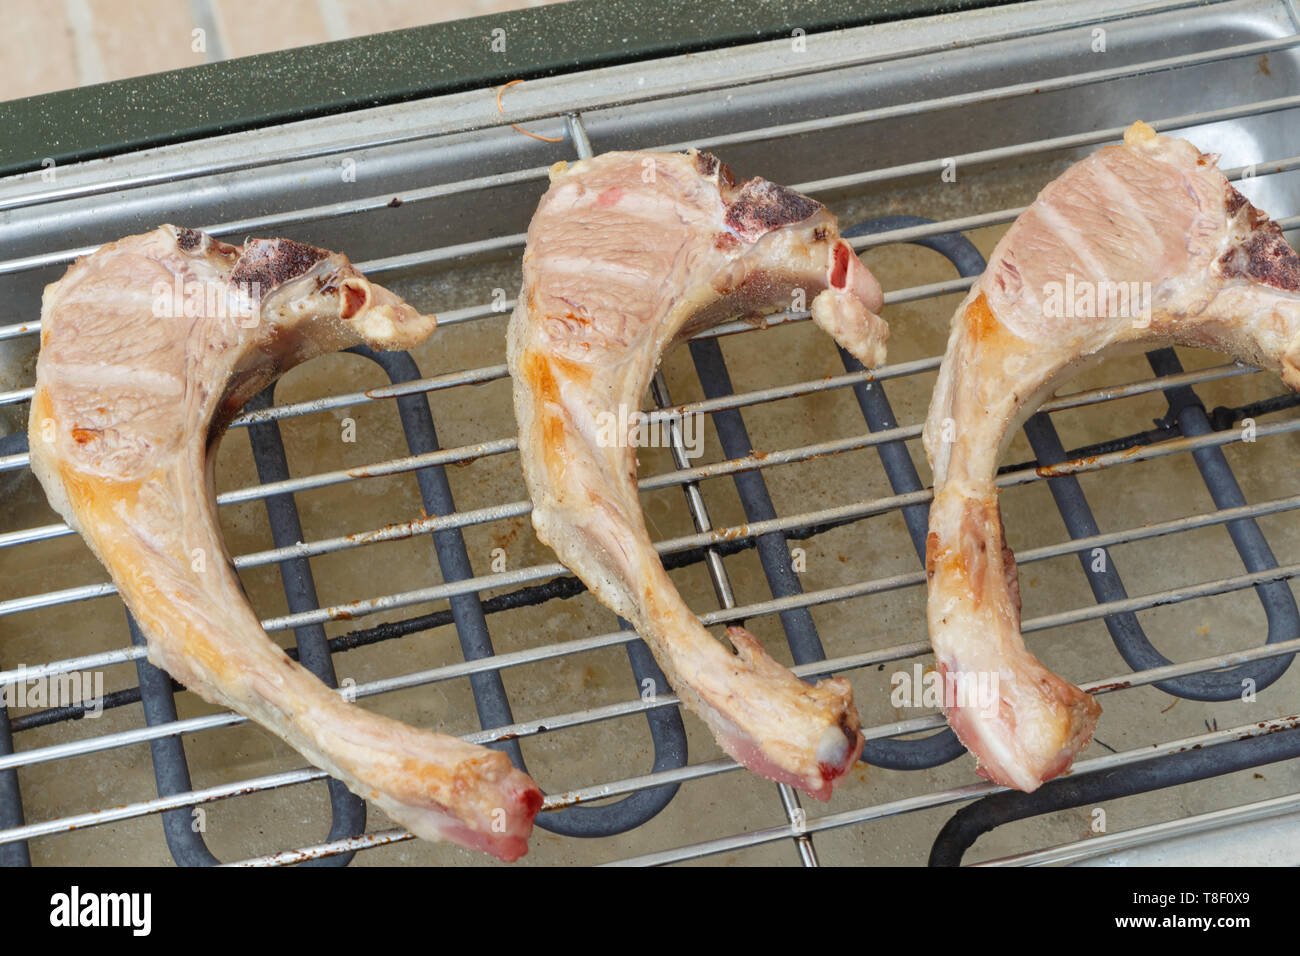 Lamb chops on the grid of an electric barbecue during summer Stock Photo